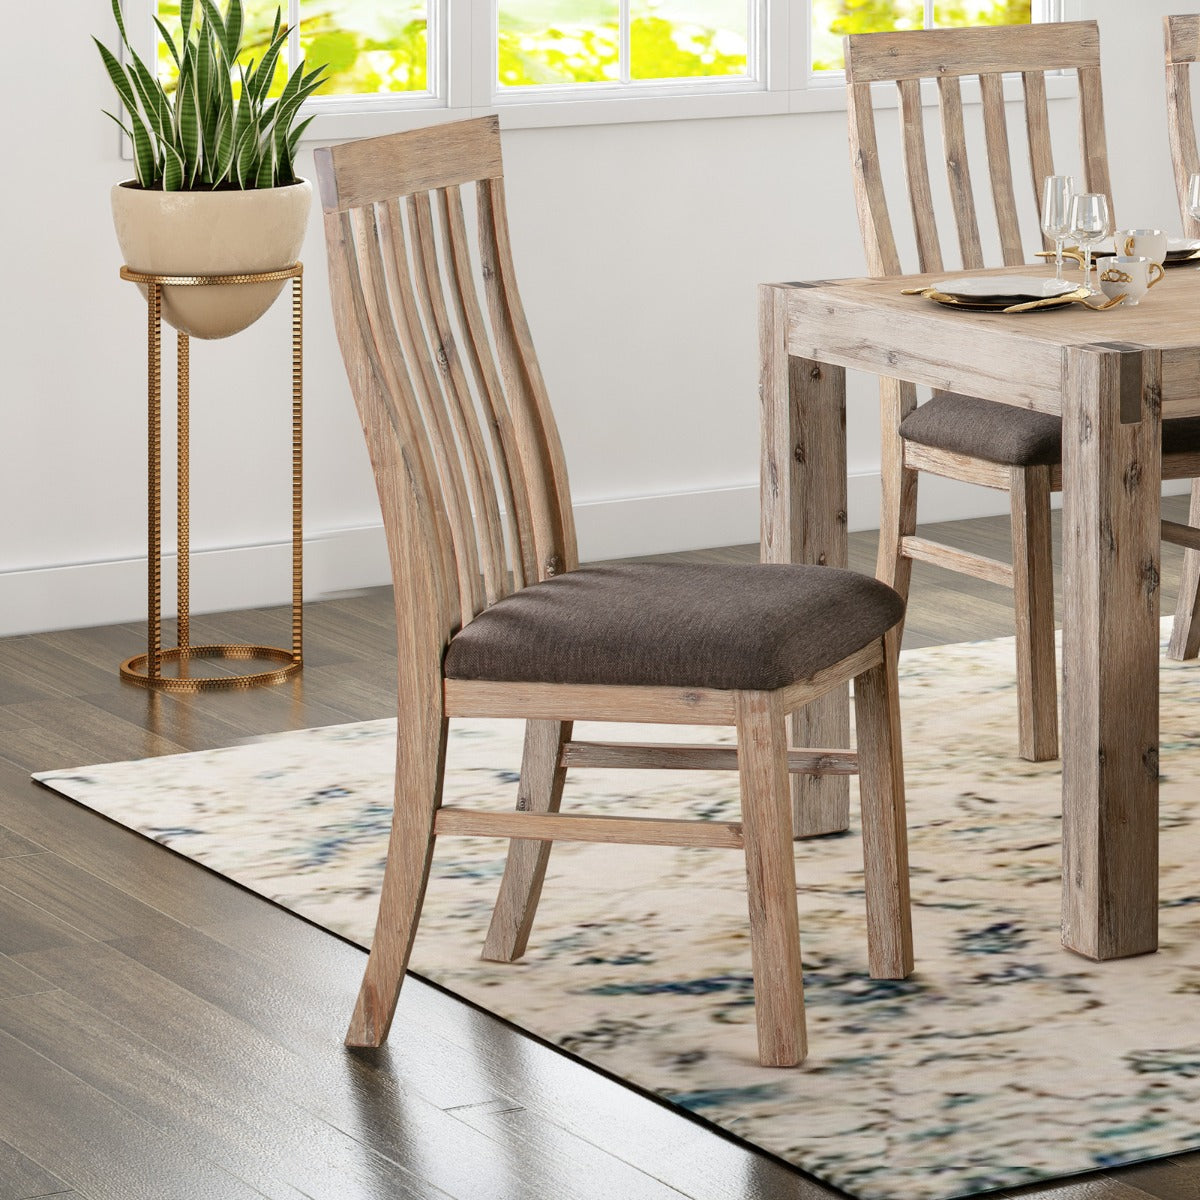 2x Wooden Frame Leatherette in Solid Acacia Wood & Veneer Dining Chairs in Oak Colour - image9